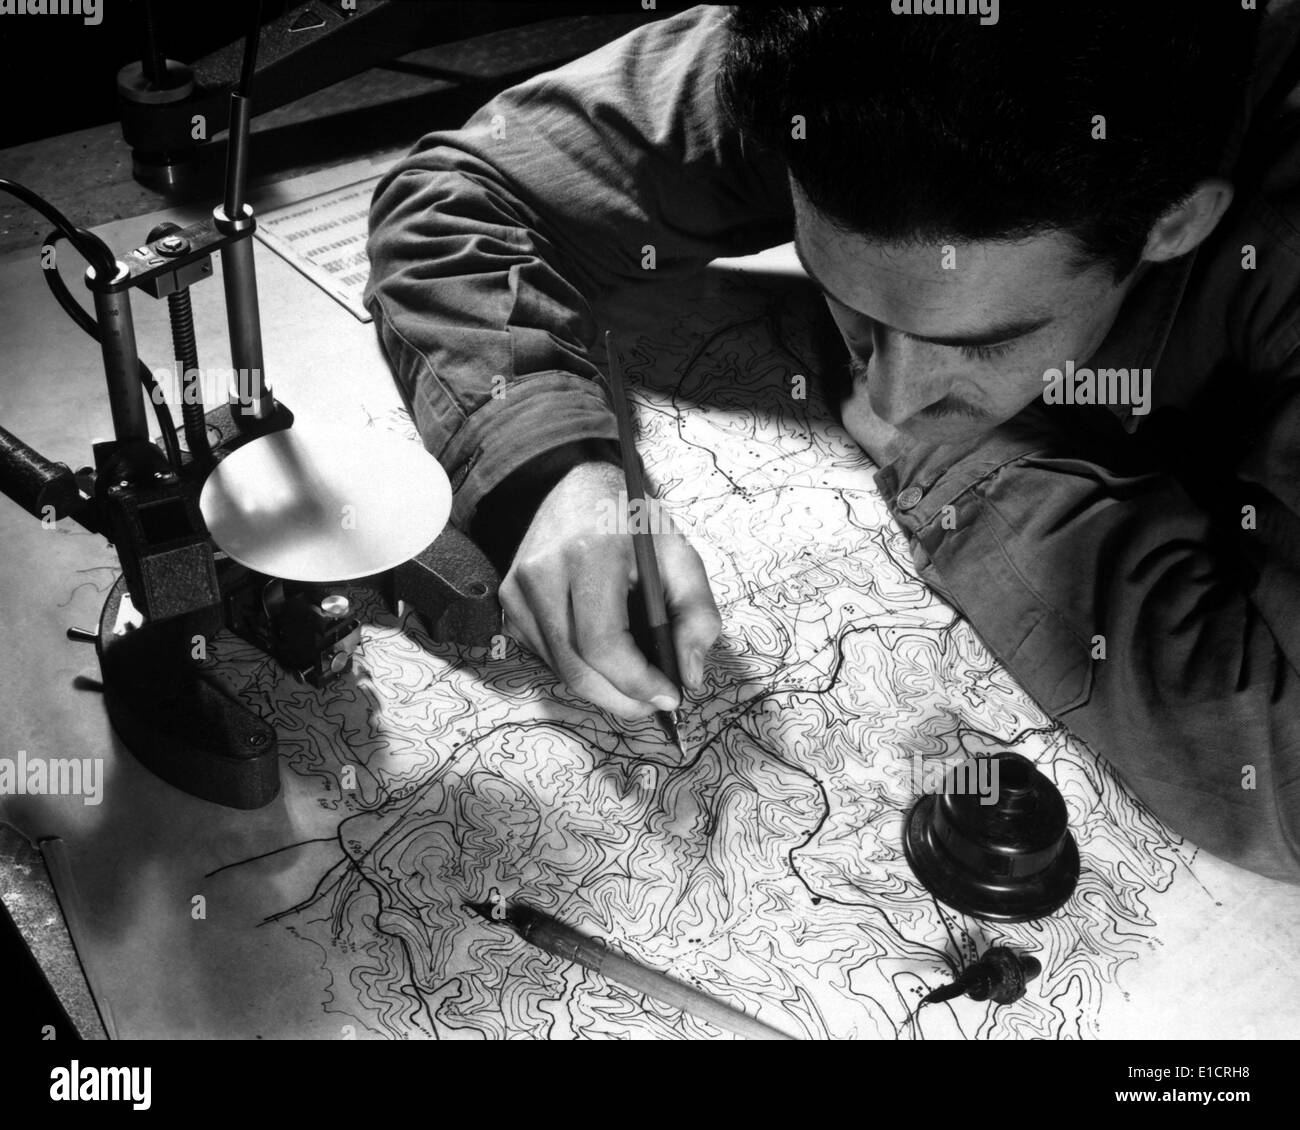 World War 2 Strategic planning for the invasion of Europe. U.S. Army map maker inking in the pencil tracings of culture, Stock Photo